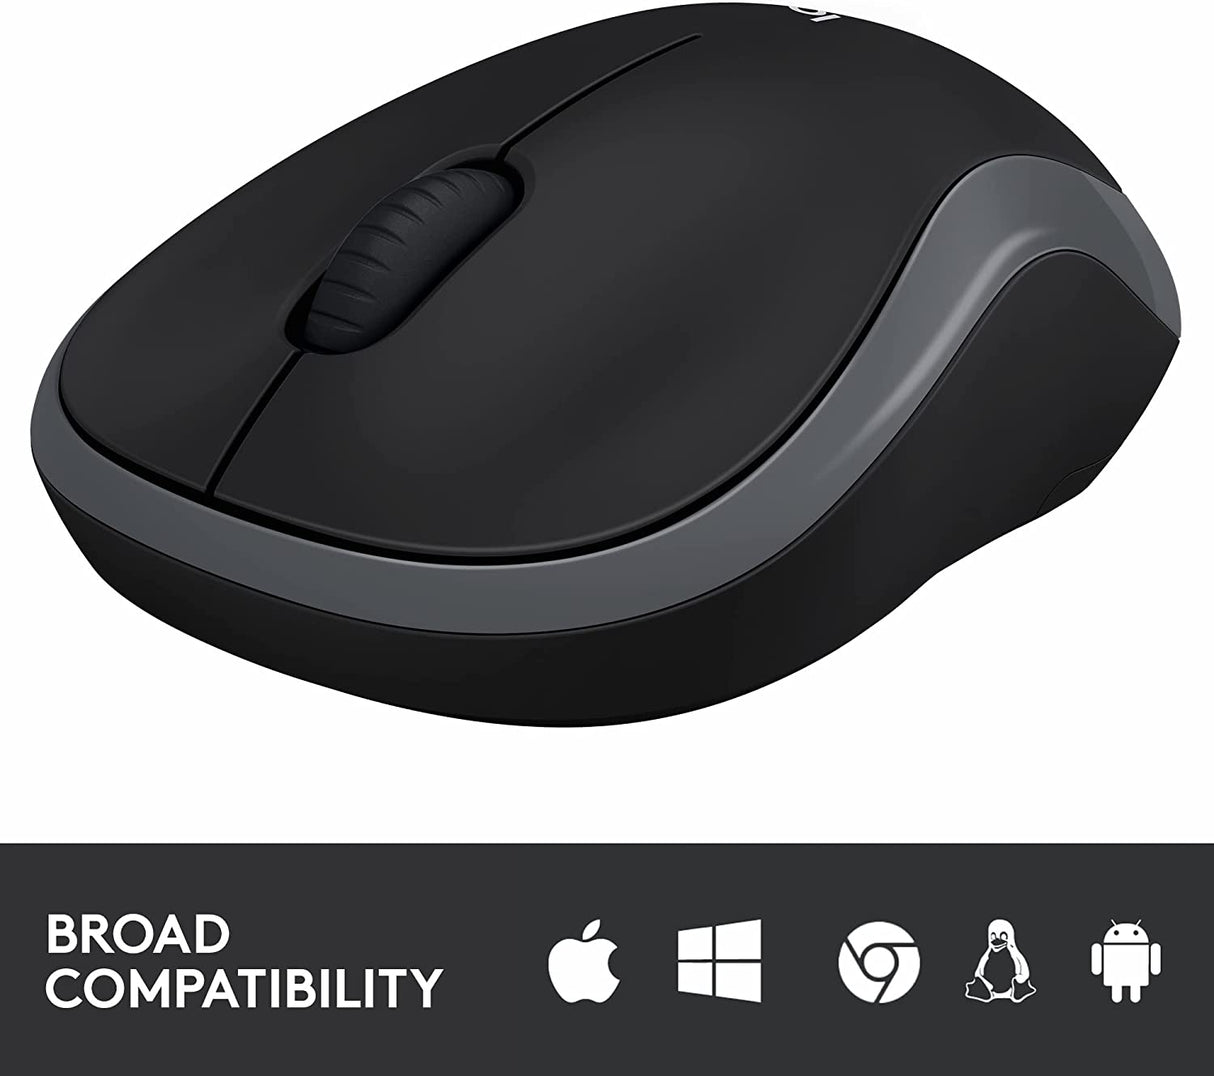 Logitech M185 Wireless Mouse, 2.4GHz with USB Mini Receiver, 12-Month Battery Life, 1000 DPI Optical Tracking, Ambidextrous, Compatible with PC, Mac, Laptop - Black Black Mouse